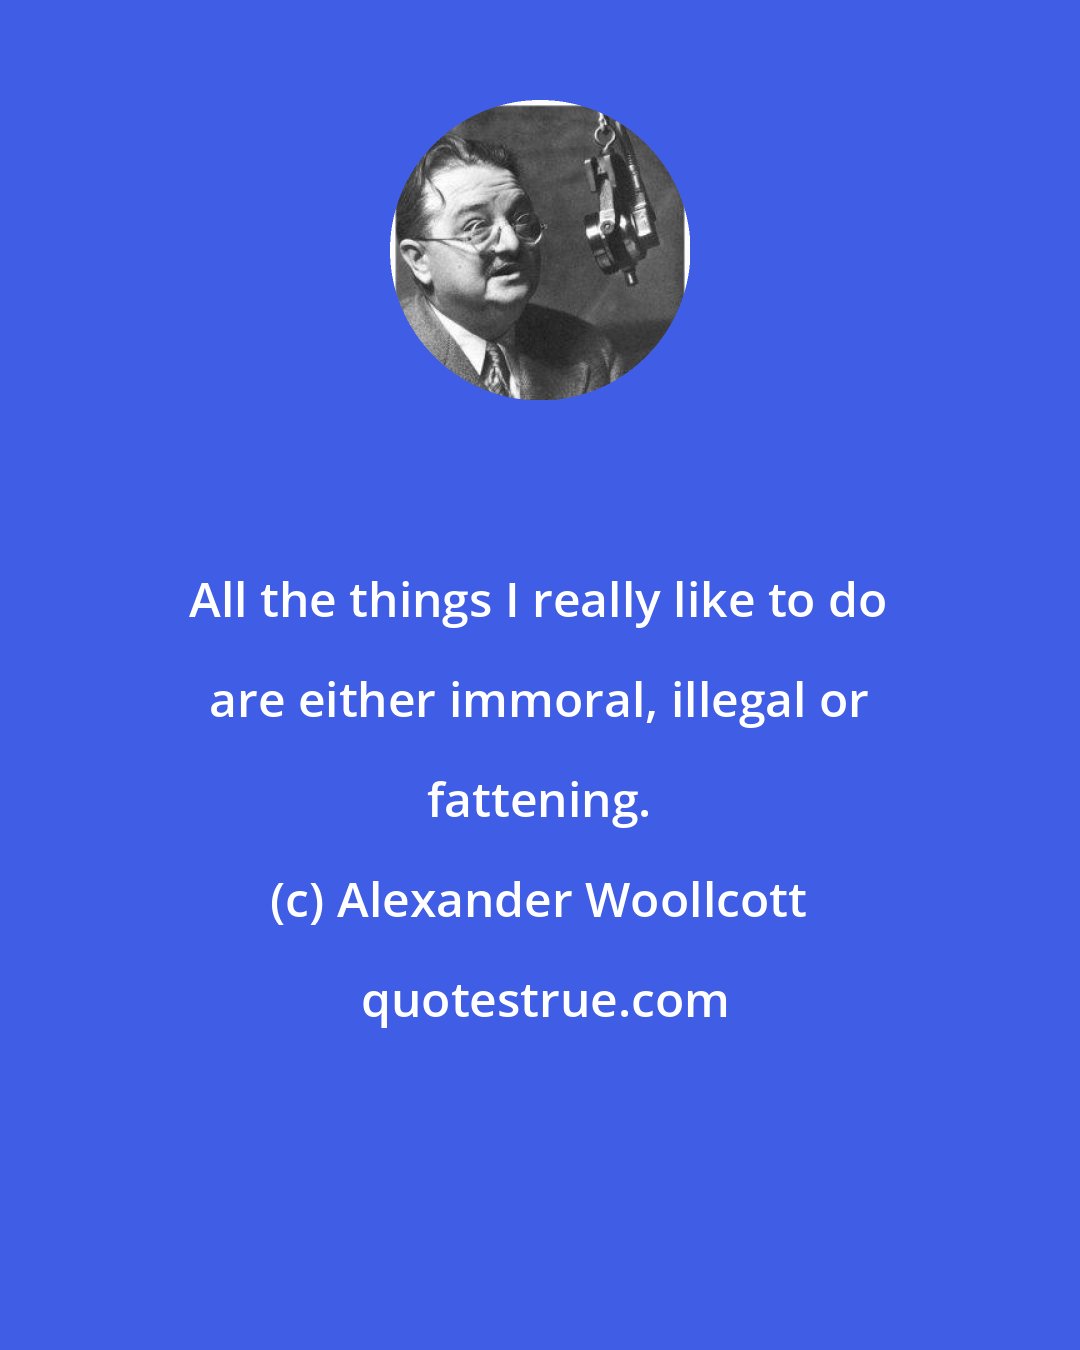 Alexander Woollcott: All the things I really like to do are either immoral, illegal or fattening.